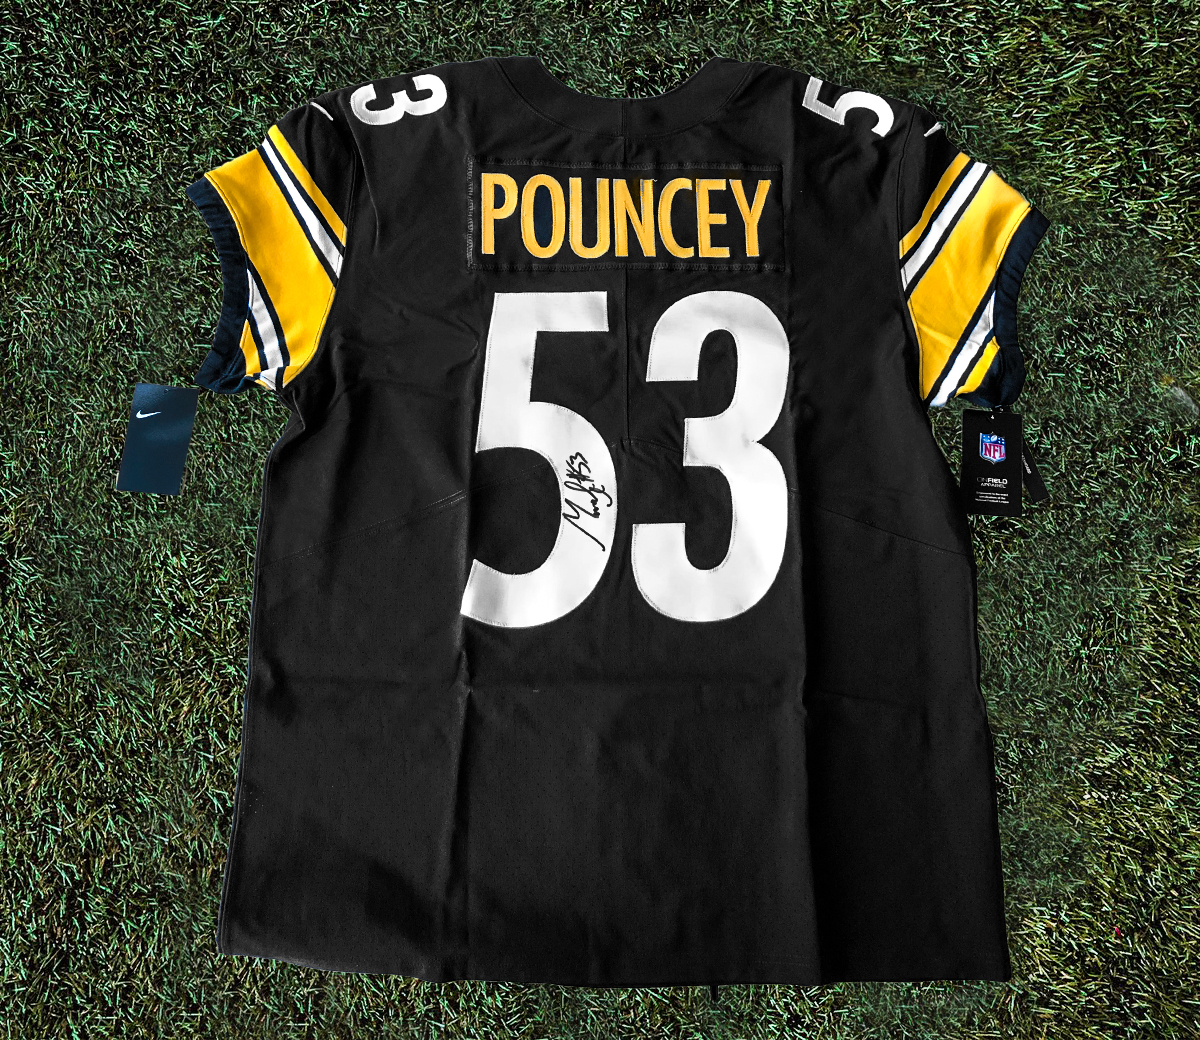 RT to win this signed @MaurkicePouncey jersey! #WPMOYChallenge + Pouncey